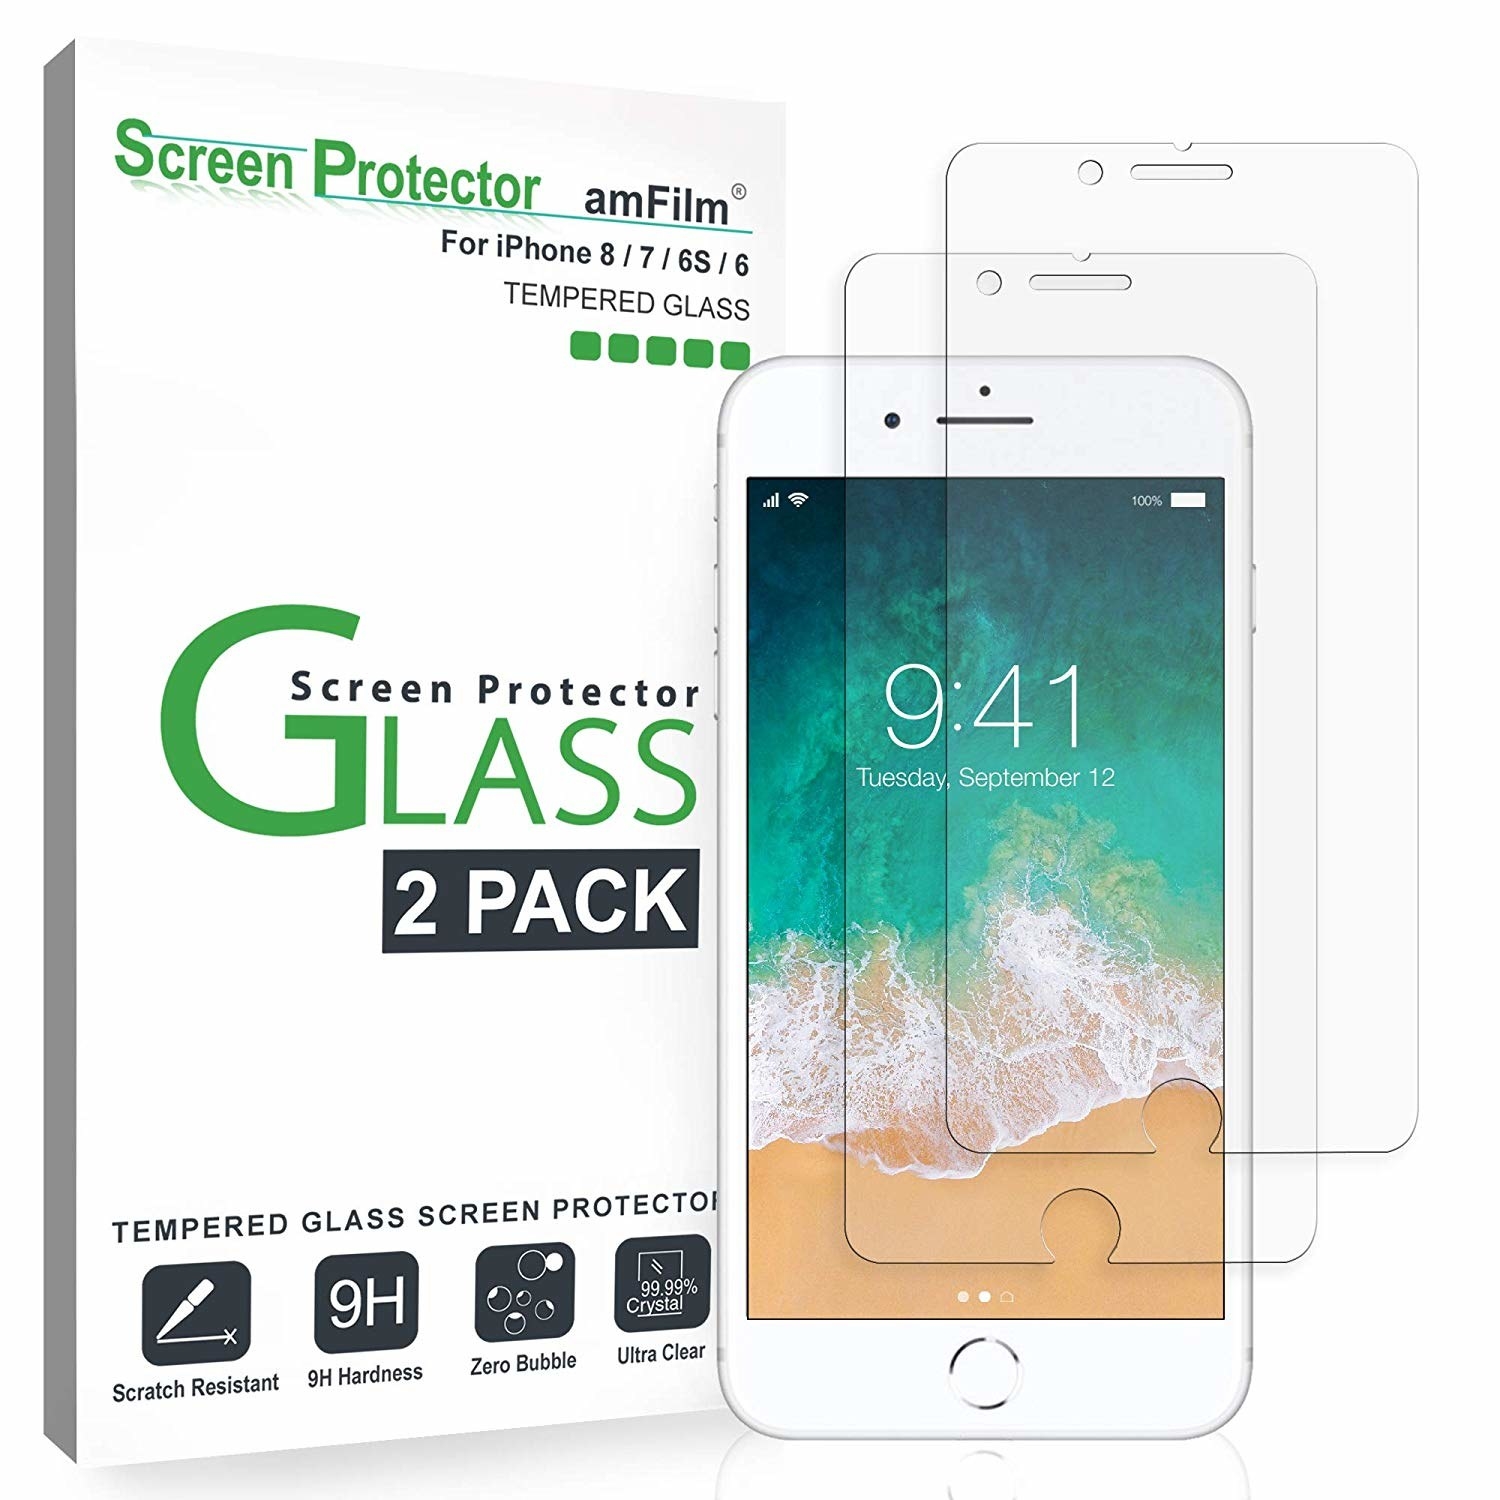 A set of two glasses screen protectors next to an iPhone